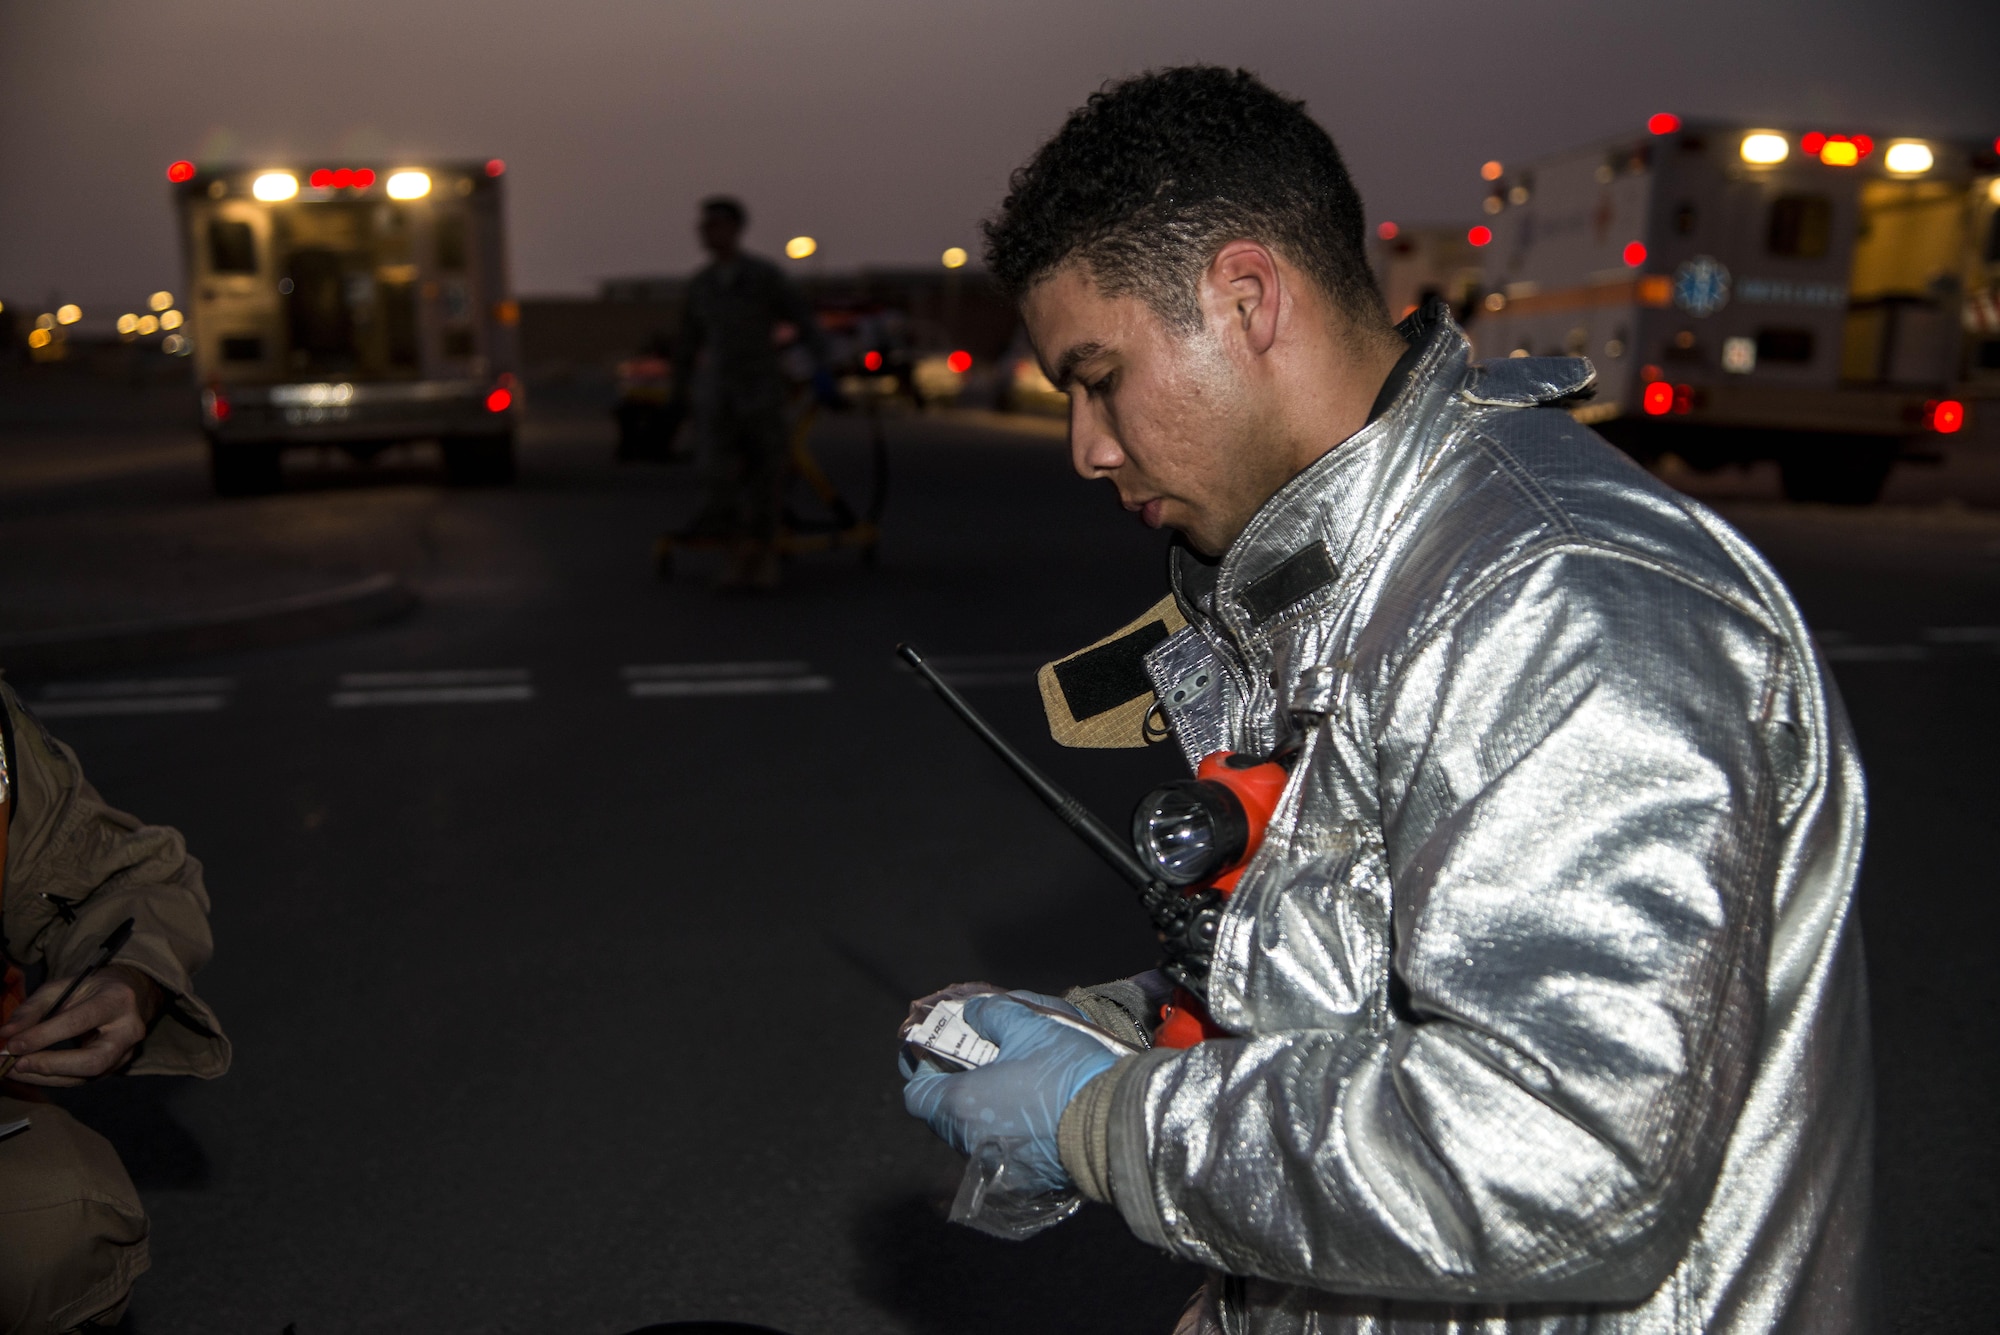 U.S. Air Force Staff Sgt. Ramon Betancourt, 379th Expeditionary Civil Engineer Squadron firefighter, pulls out a mask to prep a simulated patient to be placed in an ambulance during an active shooter scenario June 19, 2015, at Al Udeid Air Base, Qatar. Several agencies on base were tested on their reactions to the scenario to make sure proper protocols were followed in case an on-base incident truly ever occurred. (U.S. Air Force photo by Tech. Sgt. Rasheen Douglas)